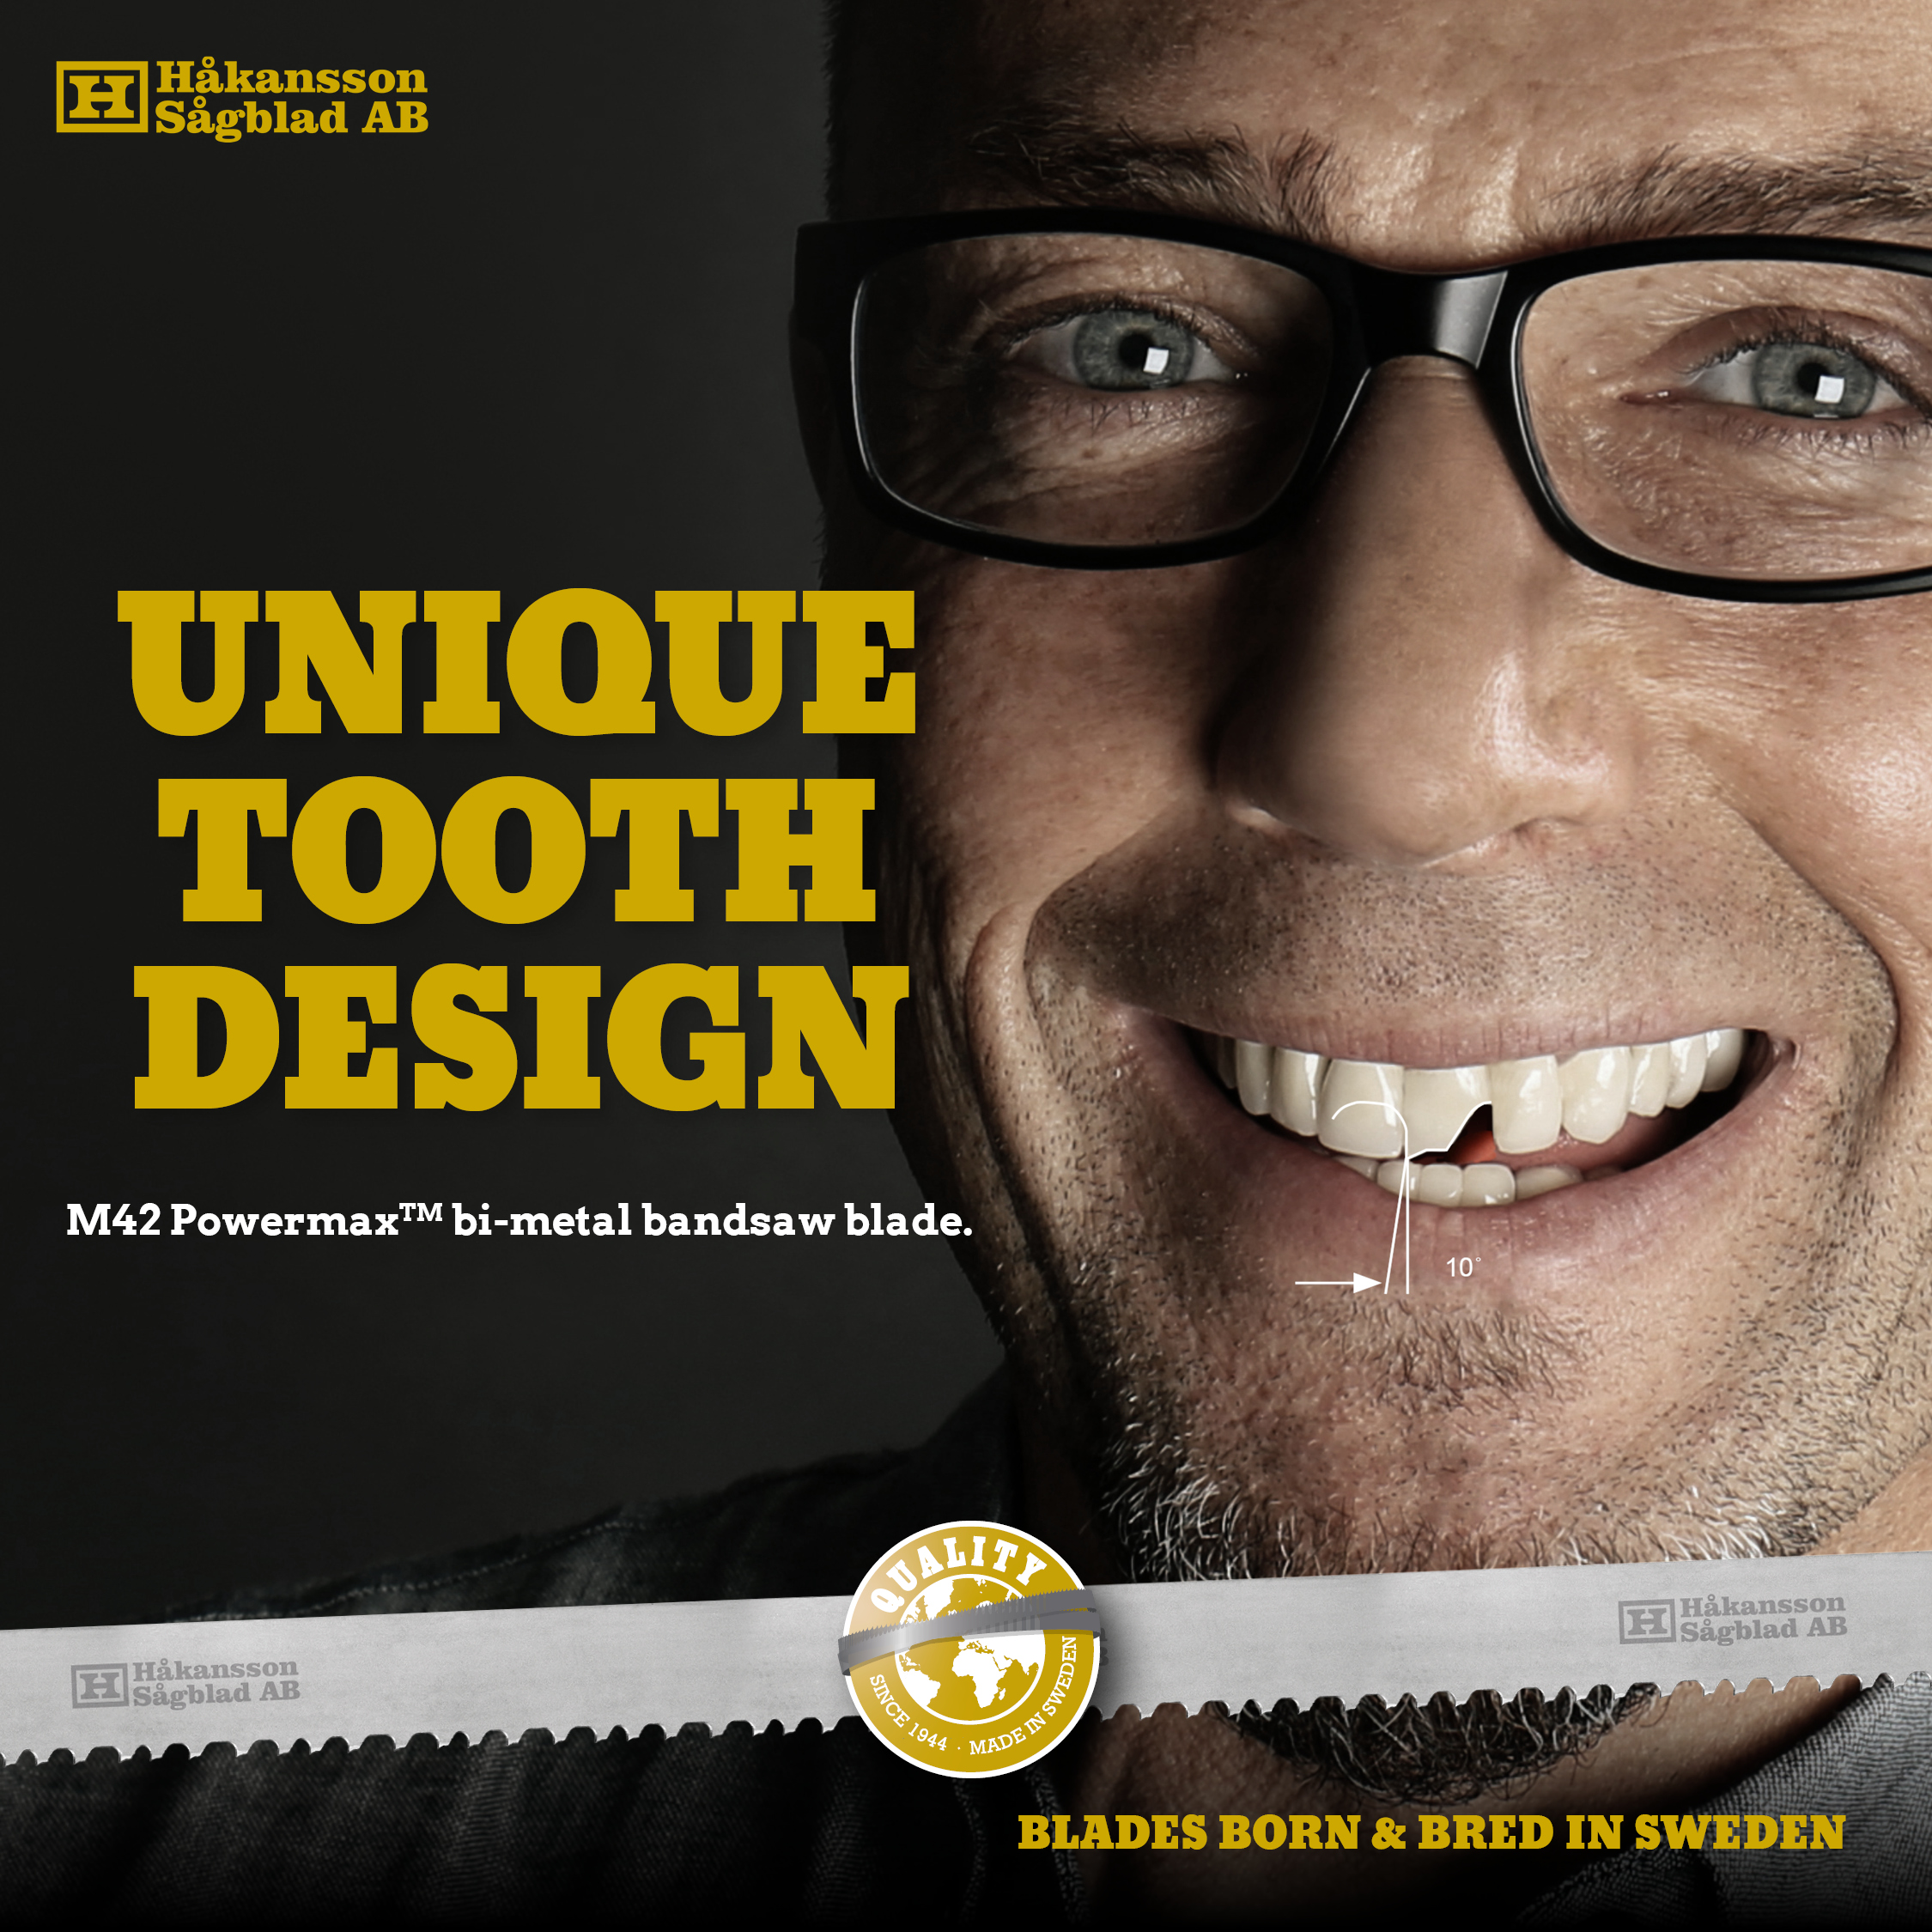 Advert UNIQUE TOOTH DESIGN, person smiling with corner missing of one tooth